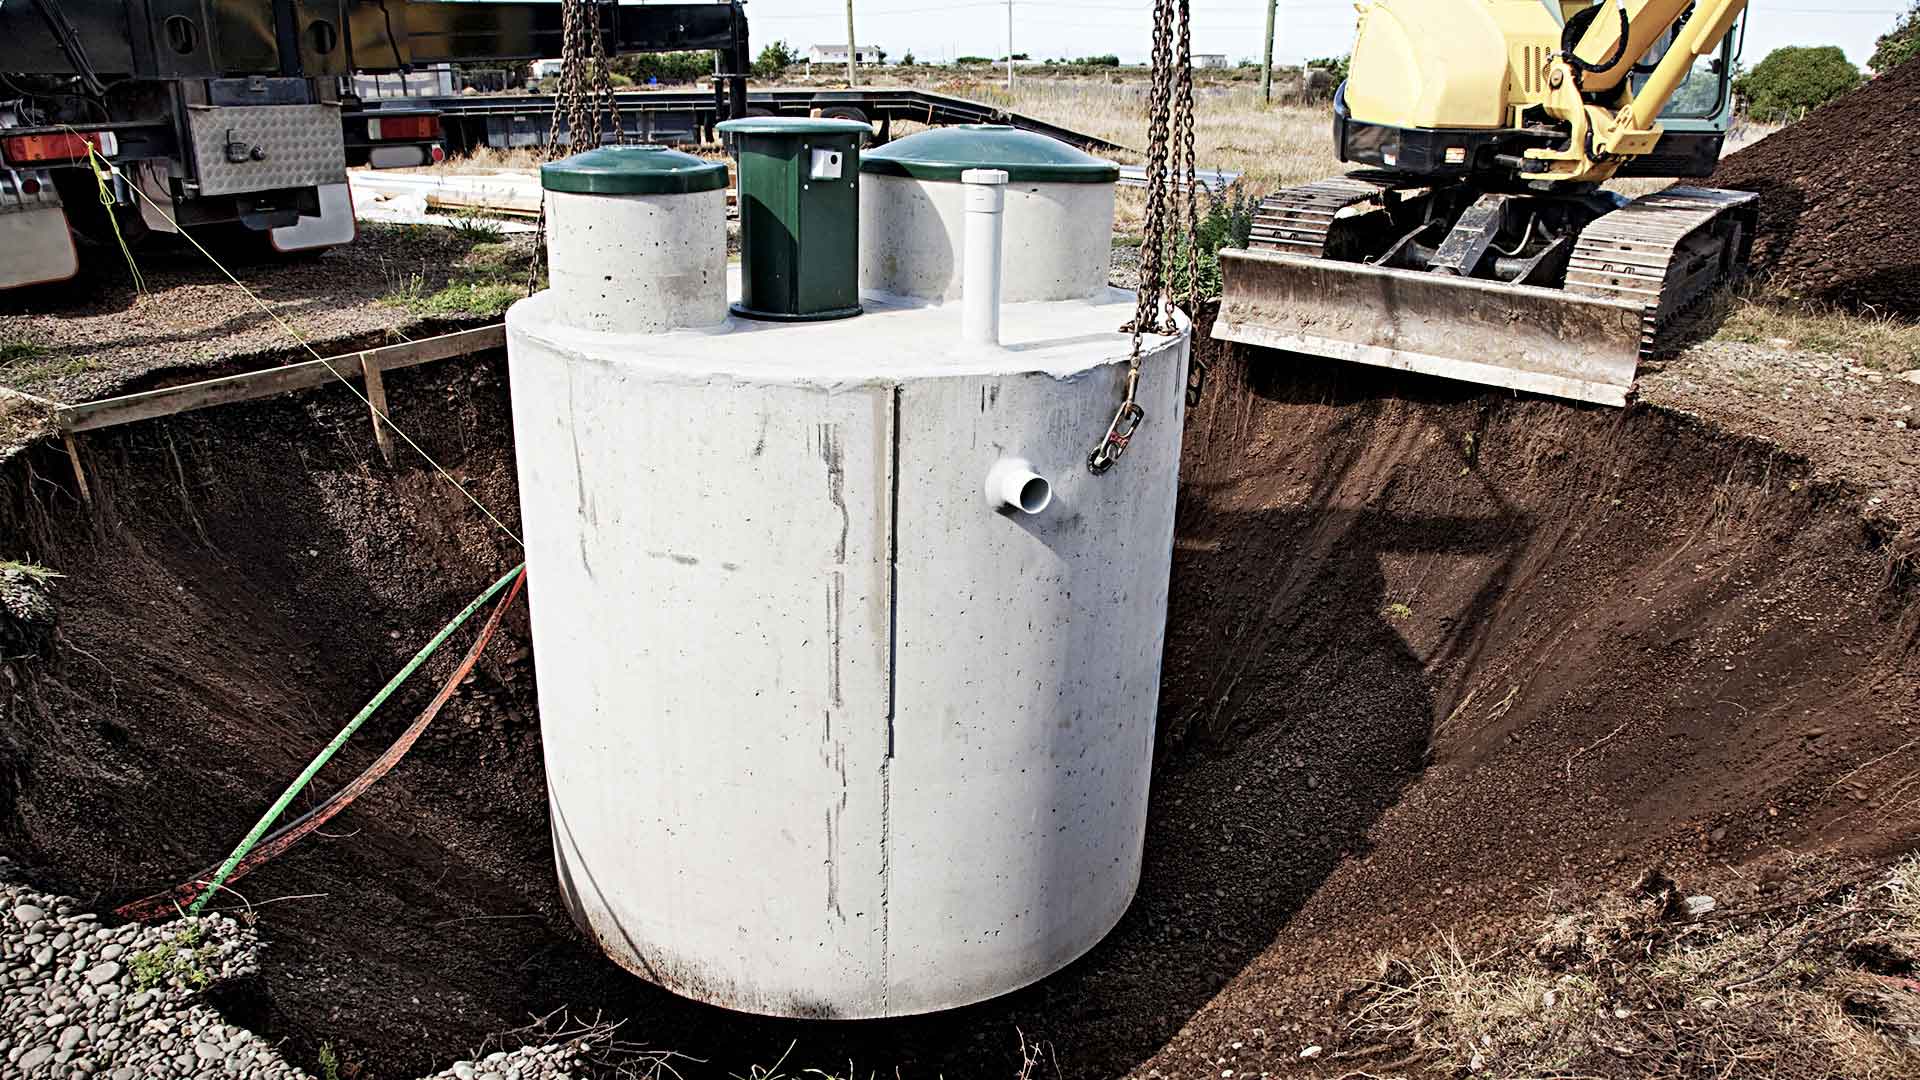 BC Interior Septic Tank Pumping, Potable Water Delivery and Portable Toilet Rentals